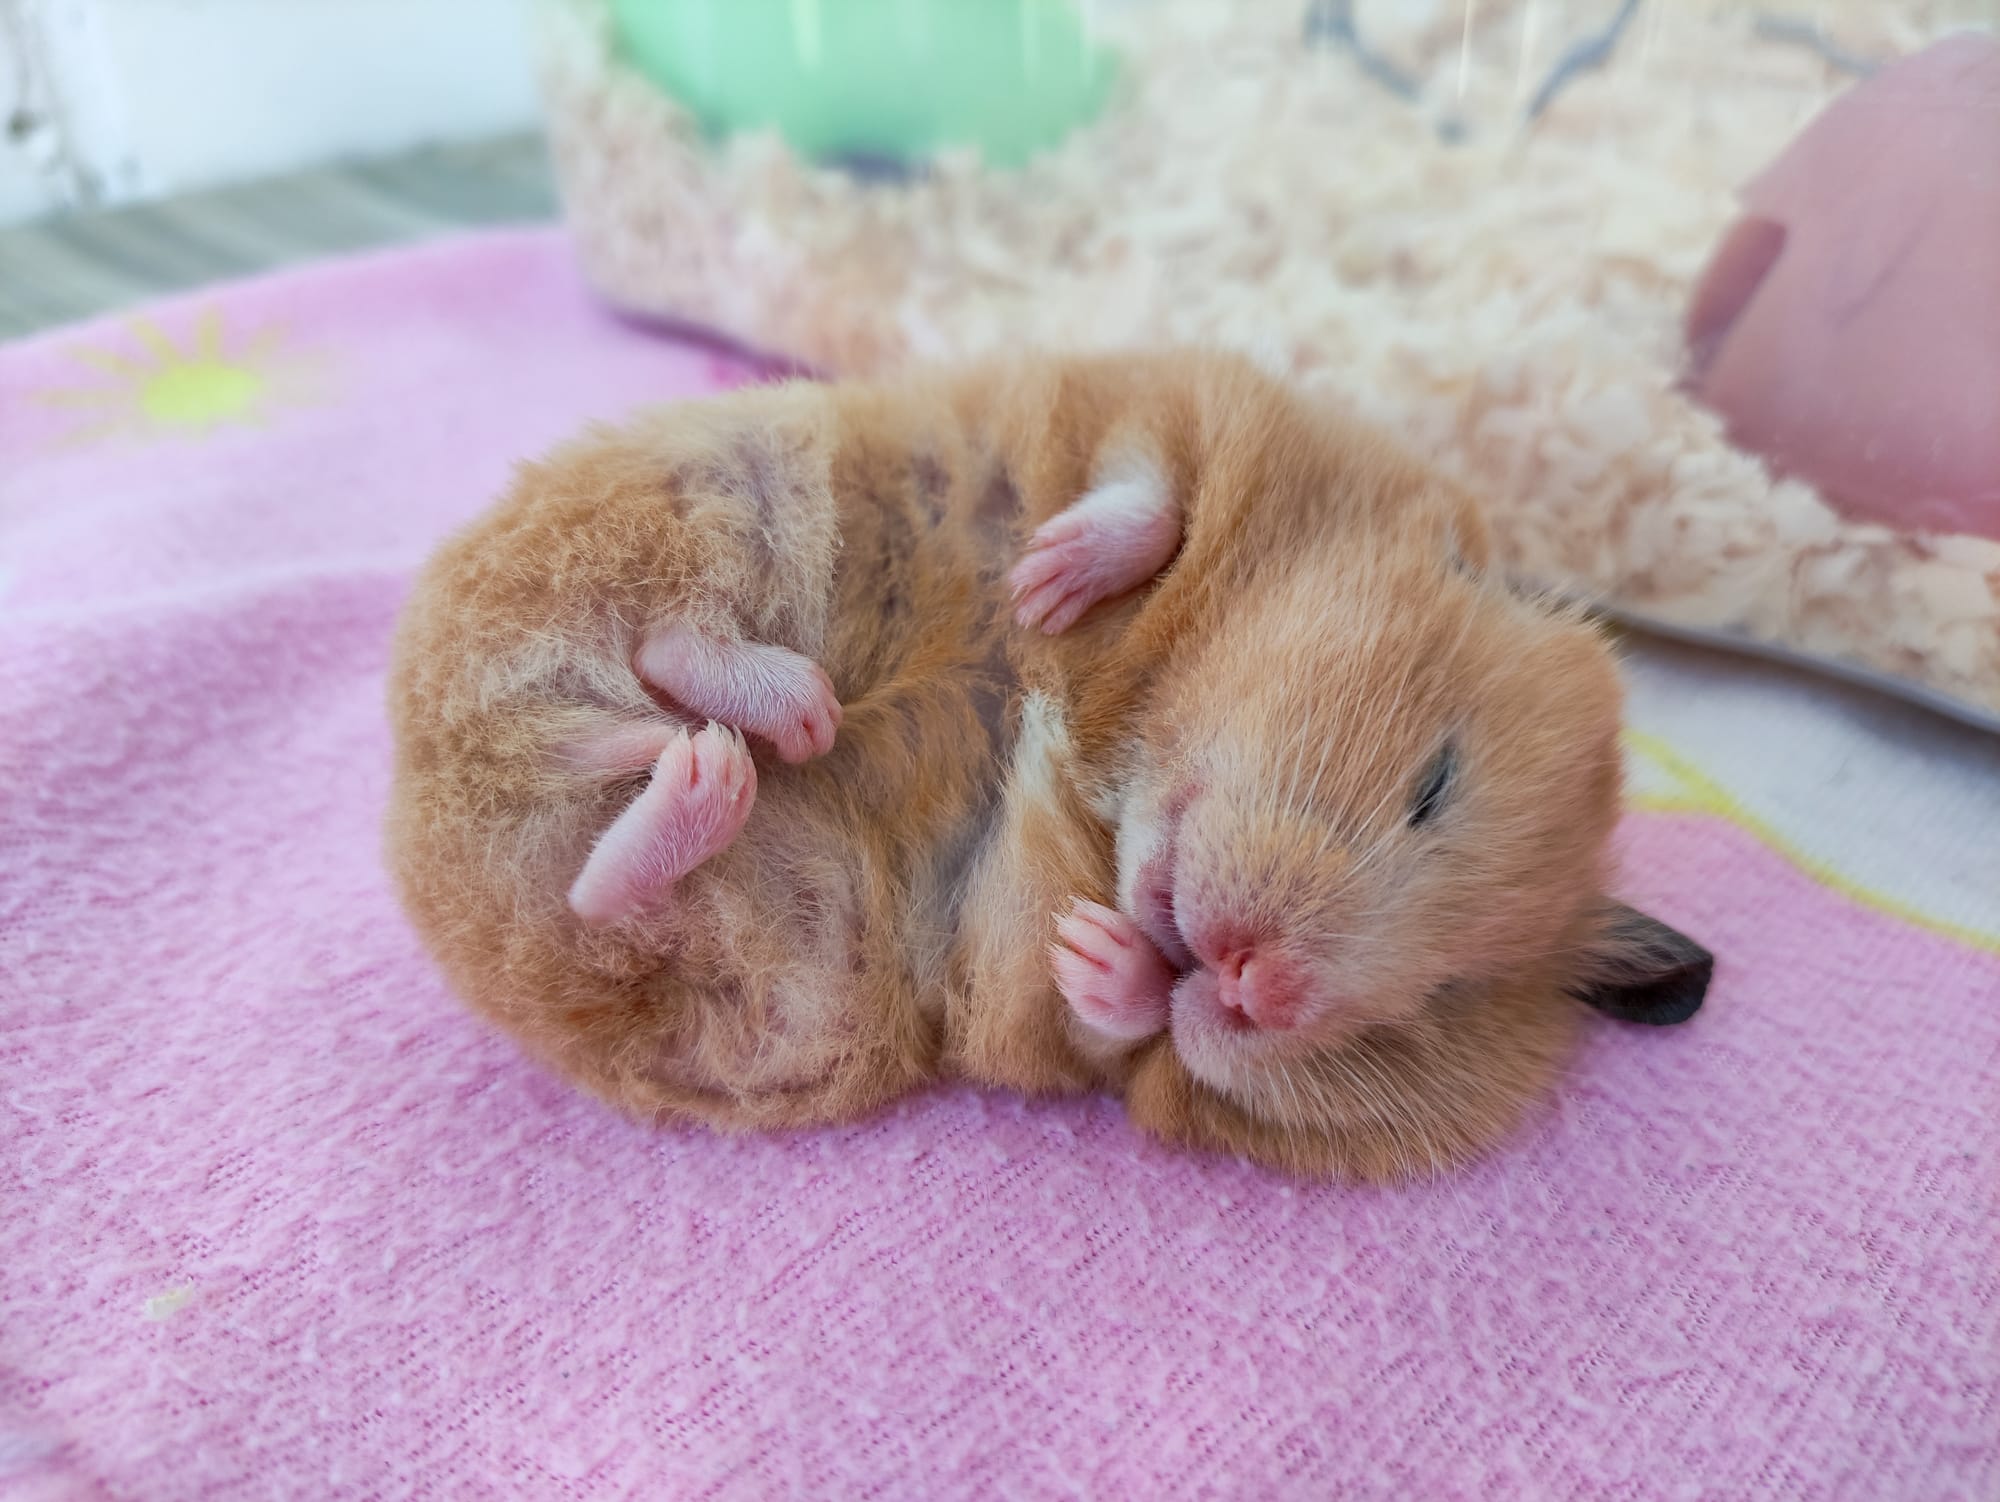 Picture of a sleeping hamster, for the blog post 'Are hamsters nocturnal?'